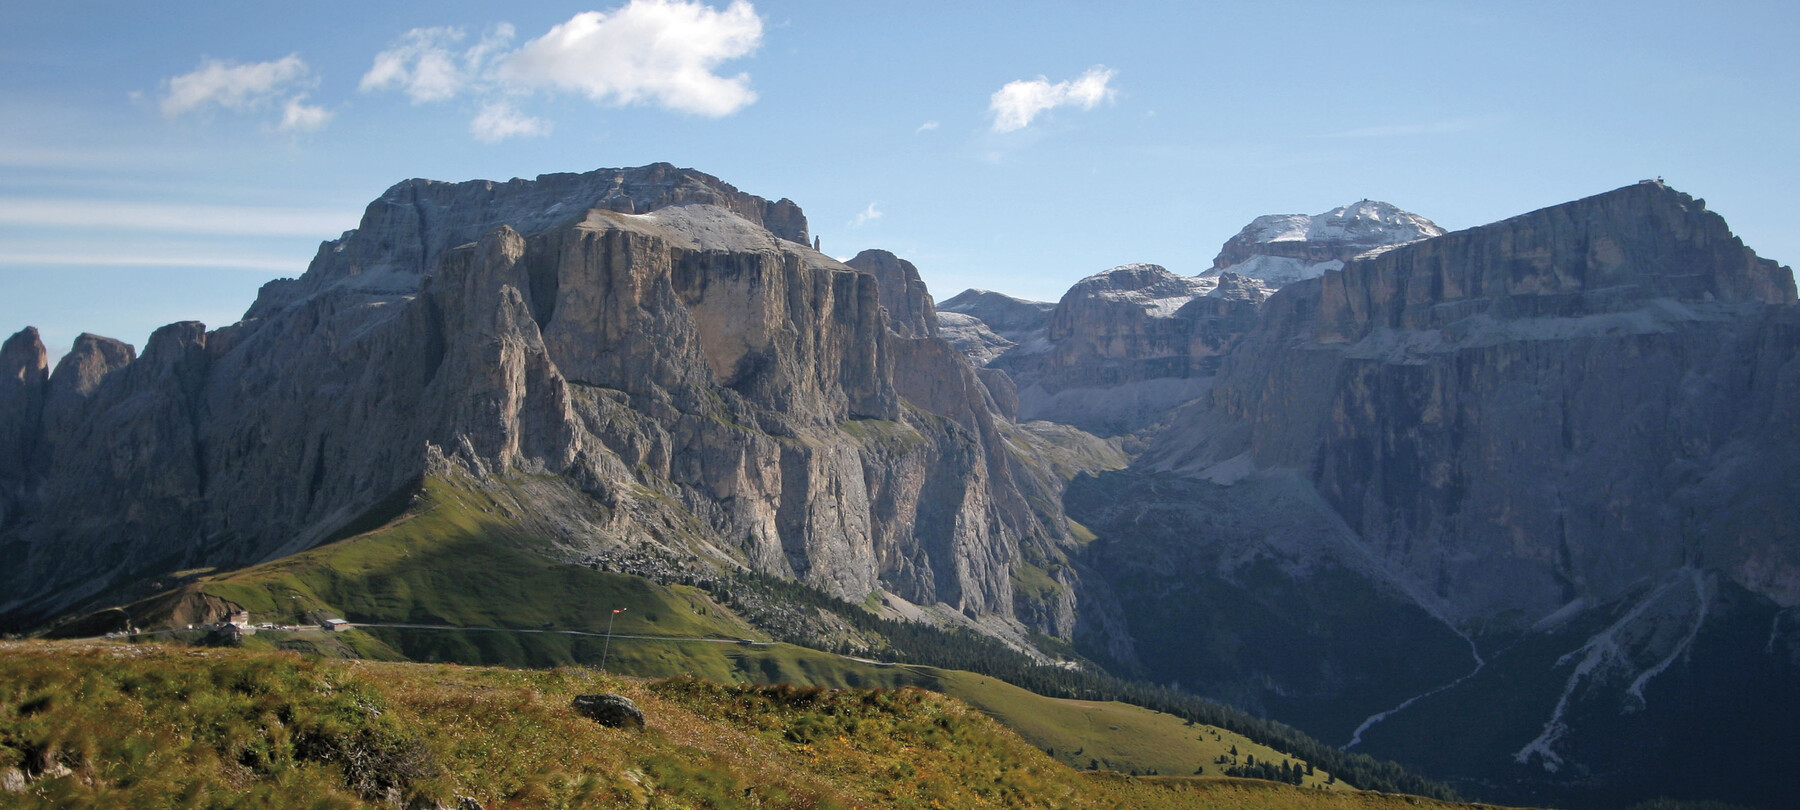 Experience the Dolomite passes in a green way, with #Dolomitesvives